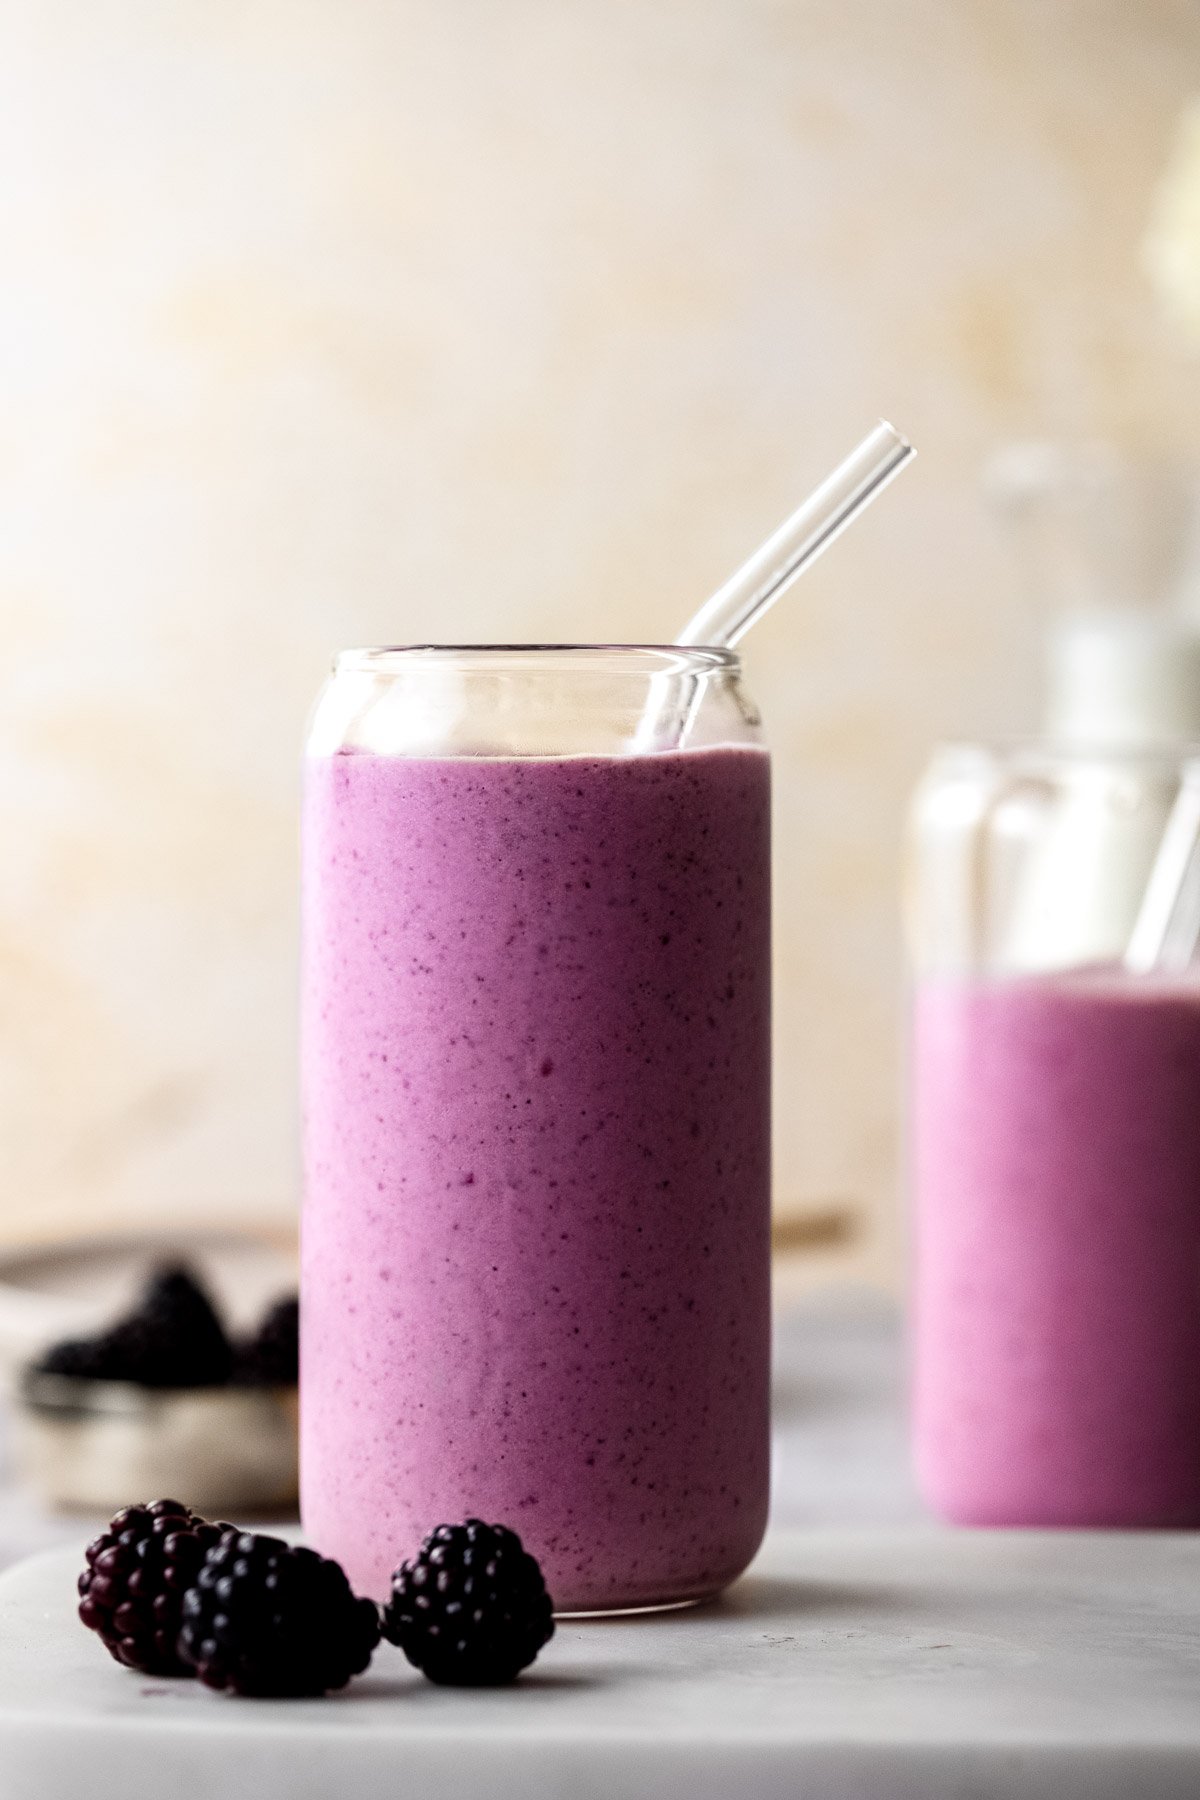 A berry breakfast drink smoothie in a serving glass with a straw.